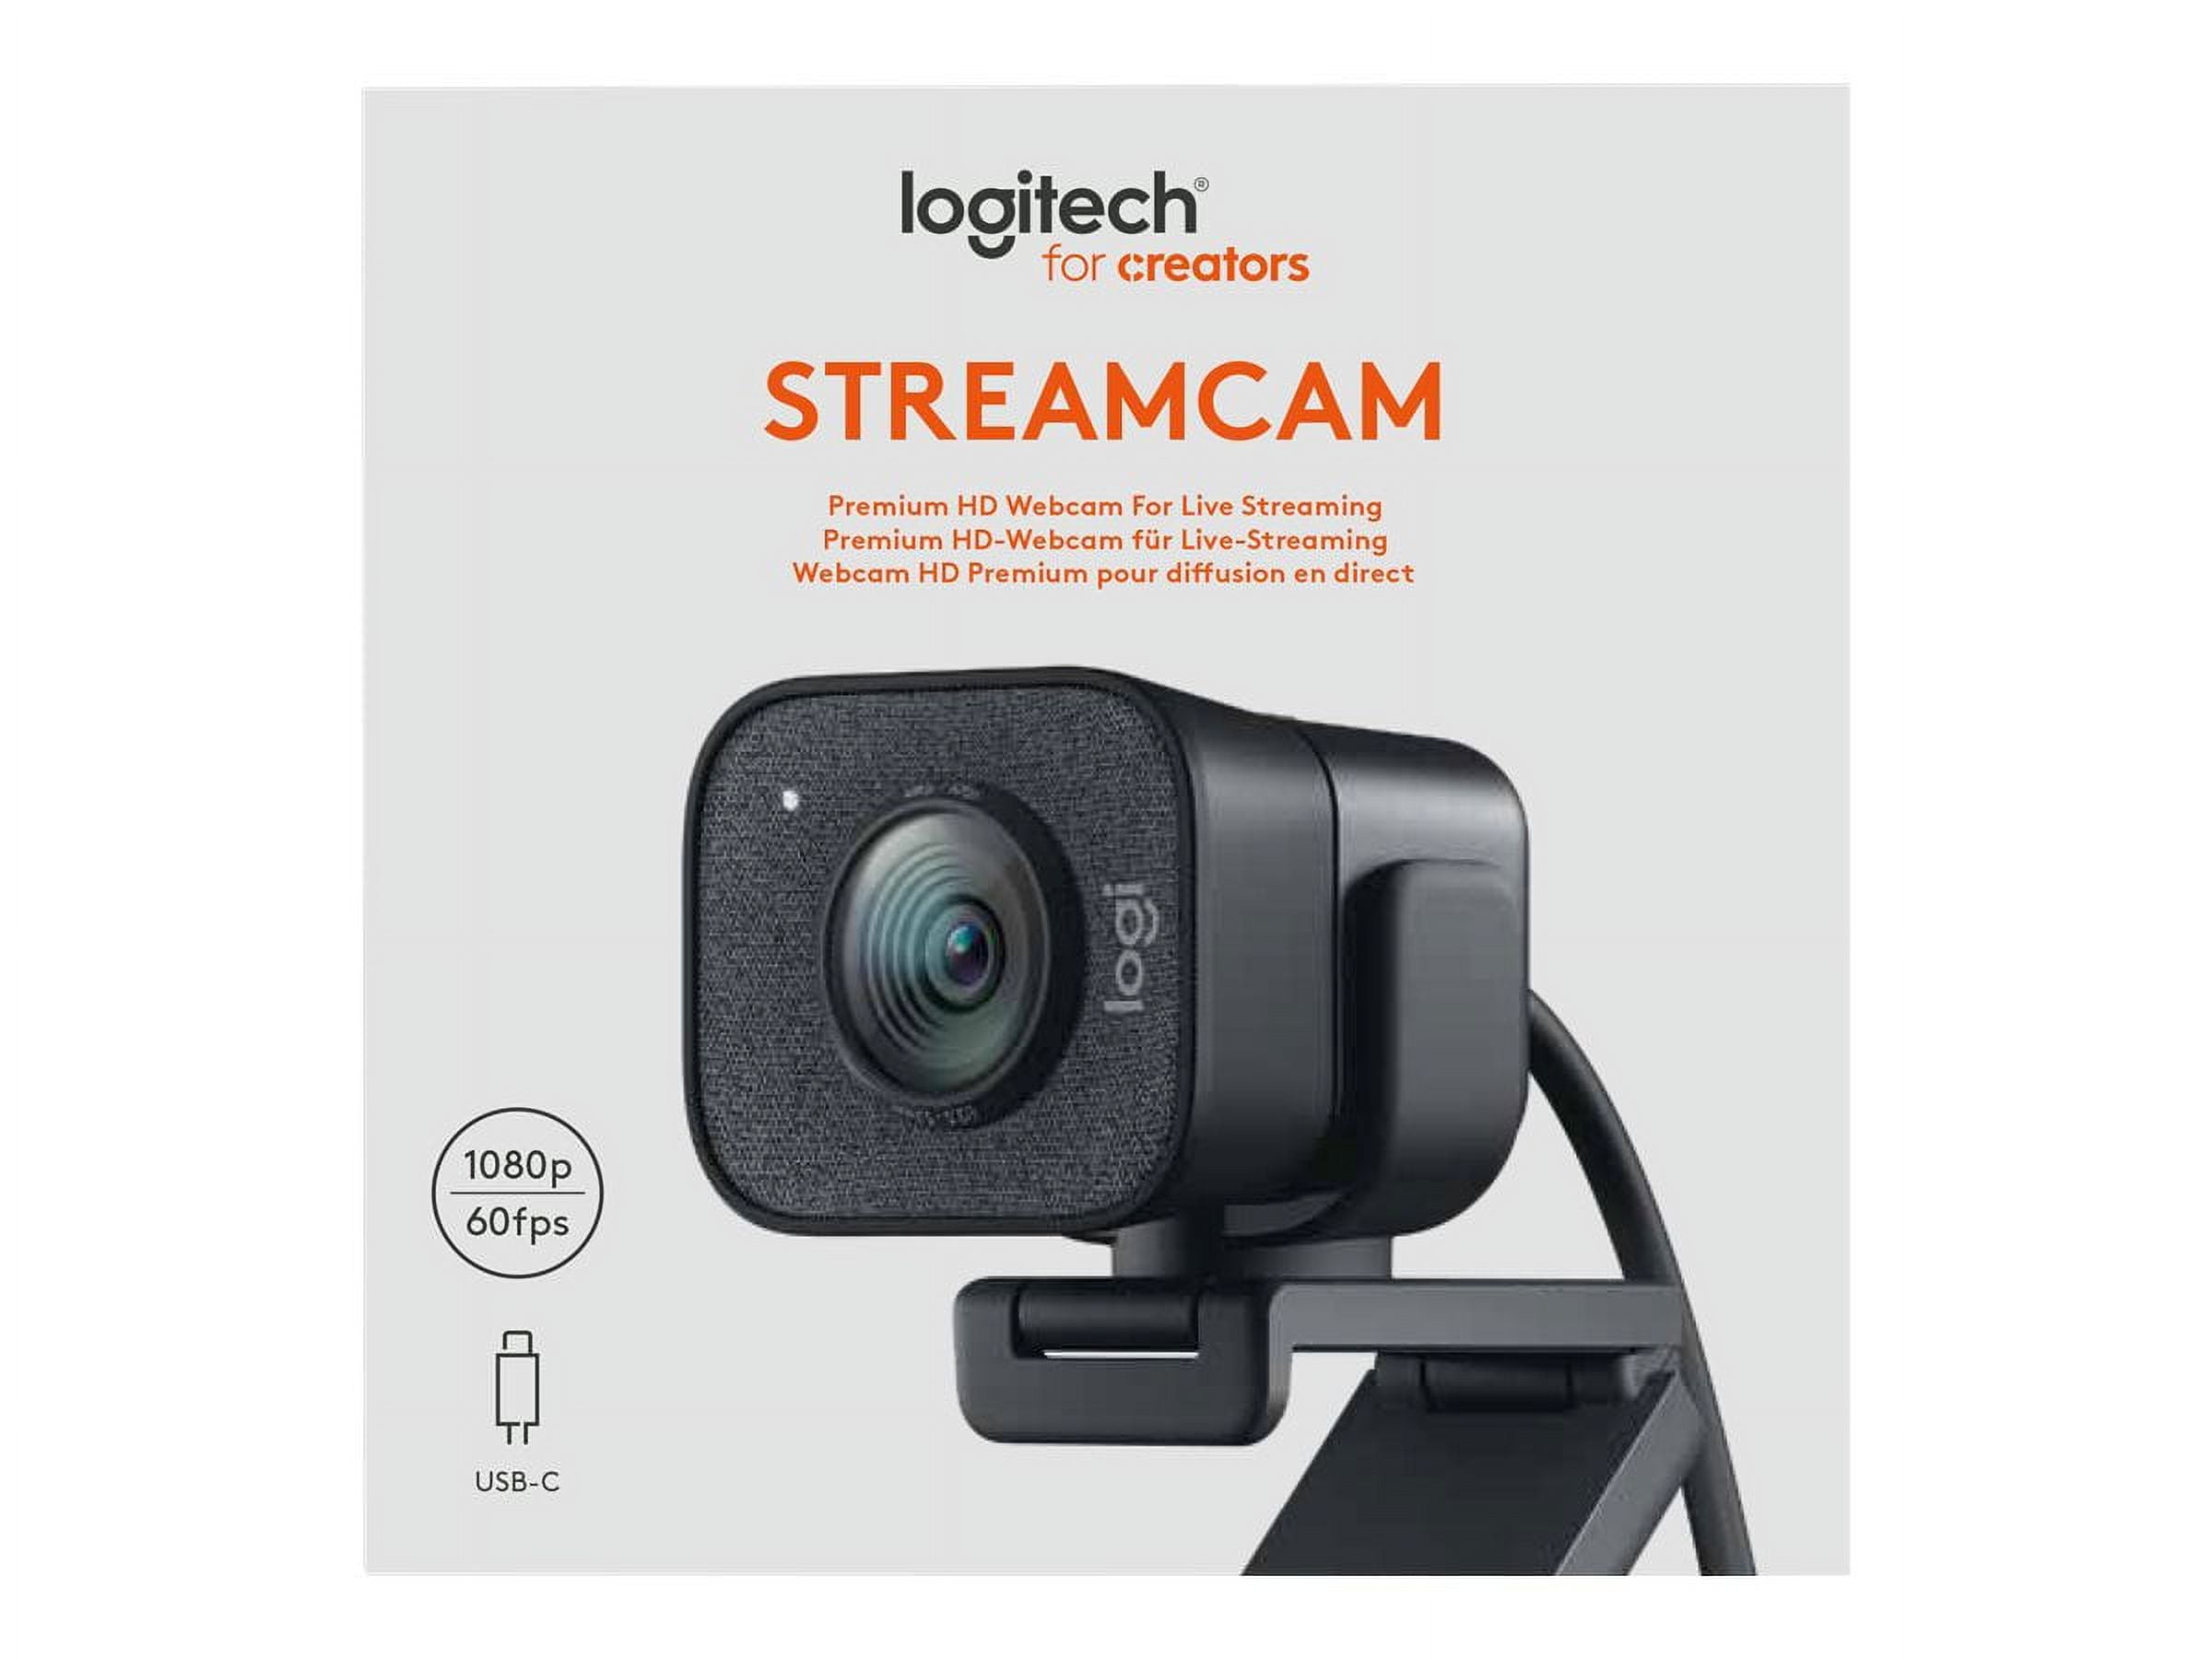 Logitech's StreamCam Is Perfect for Creators and Is Just $116 at Walmart  Now - CNET